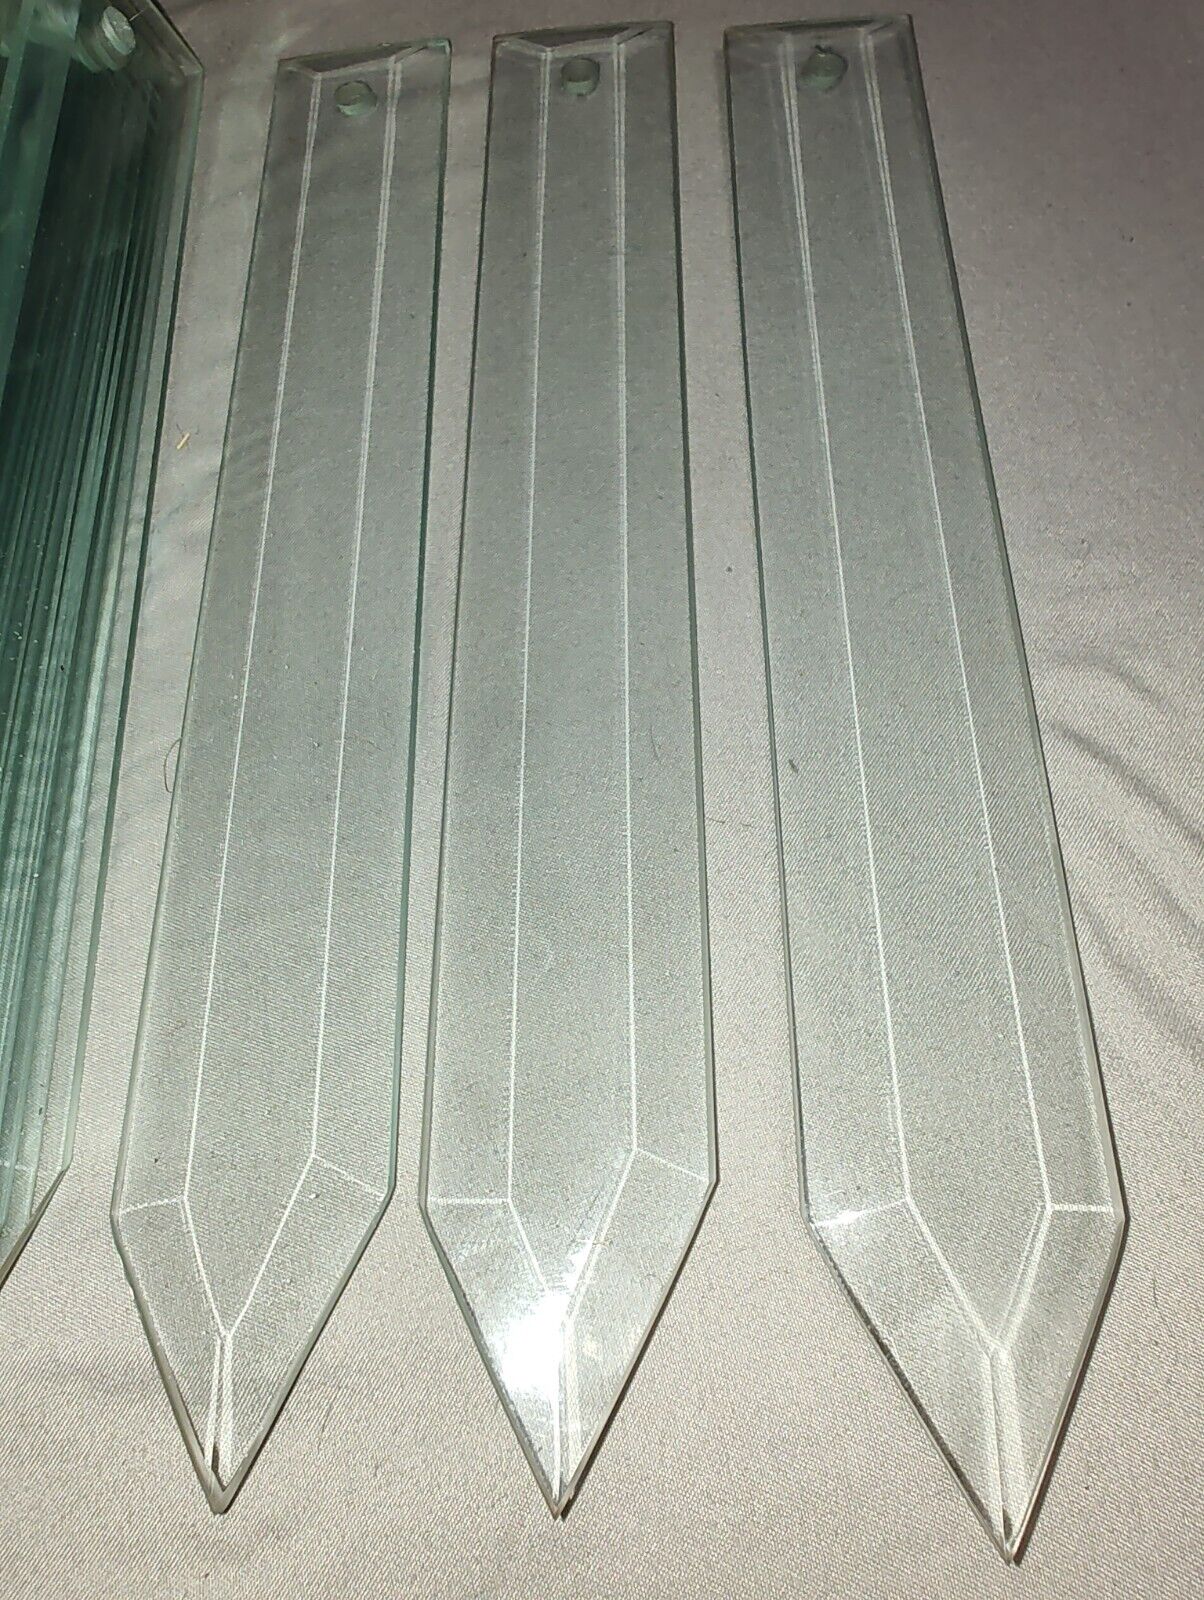 Vintage Clear Glass Chandelier Replacement Panels (30)Flat straight  Beveled MCM